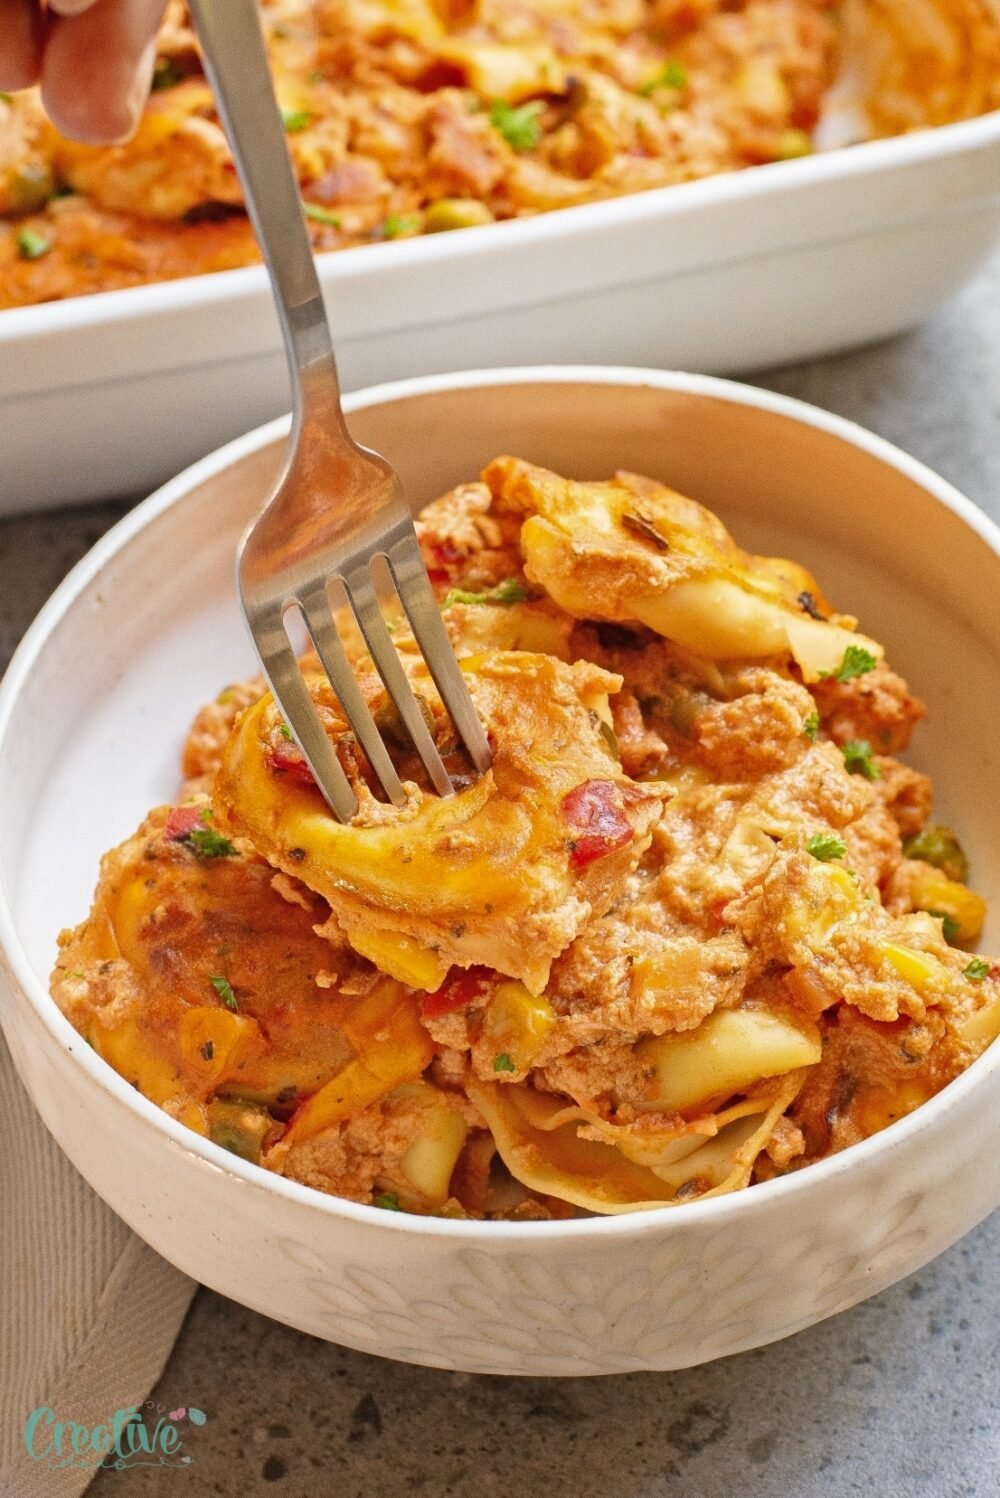 This baked tortellini casserole will be your go-to-recipes when craving comfort food but feel too guilty to indulge in recipes that are full of fats, high cholesterol and calories.